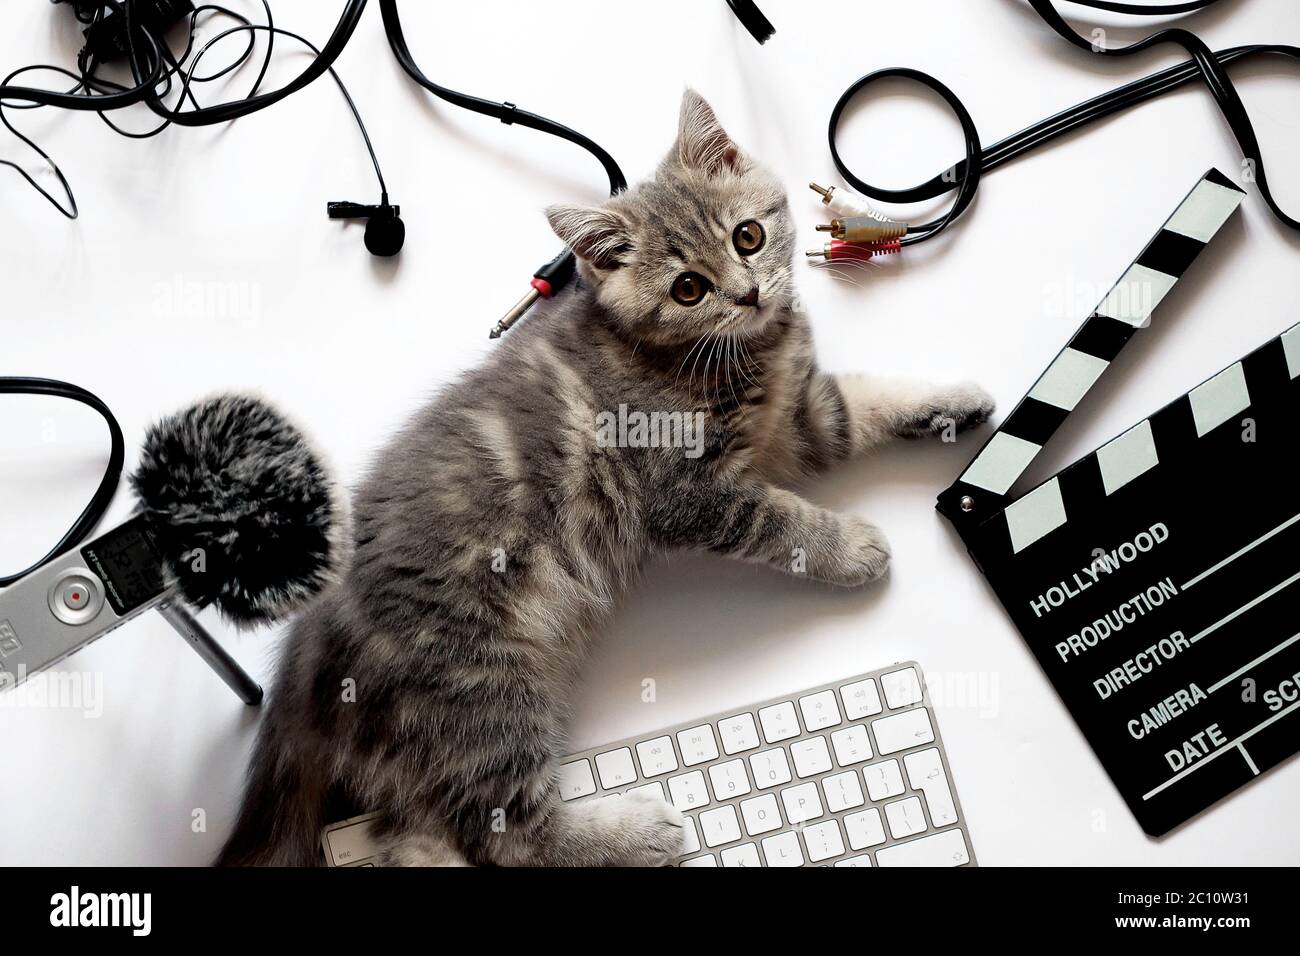 Cat in recording studio close up. The cat lies in the workplace near the zoom h1 recorder with a dead cat, clapperboard and other cords with cables for sound recording. Photo on a white background close up with a kitten of the Scottish Straight breed Stock Photo